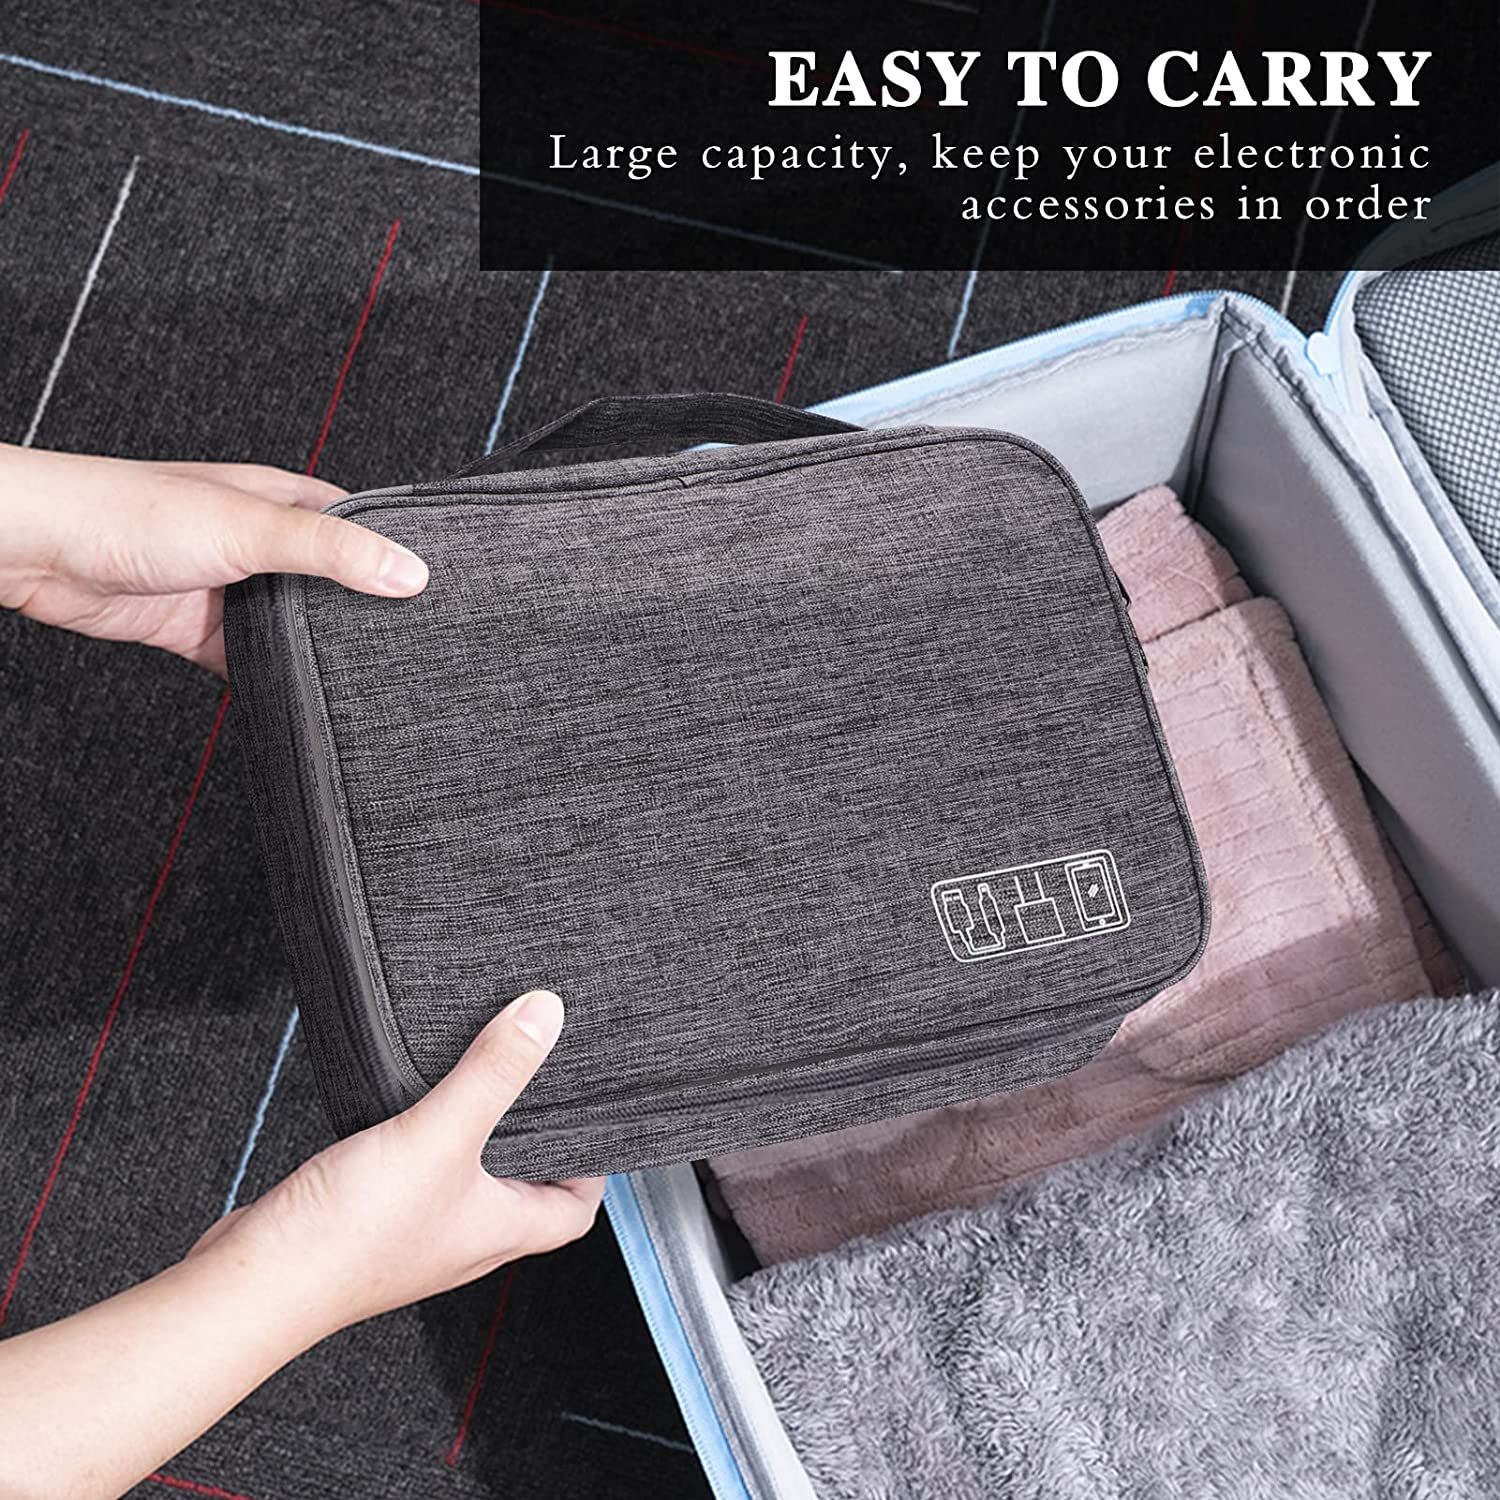 FREE - Travel Cable Organizer Pouch bag for Electronic Accessories - GREY (SDA)